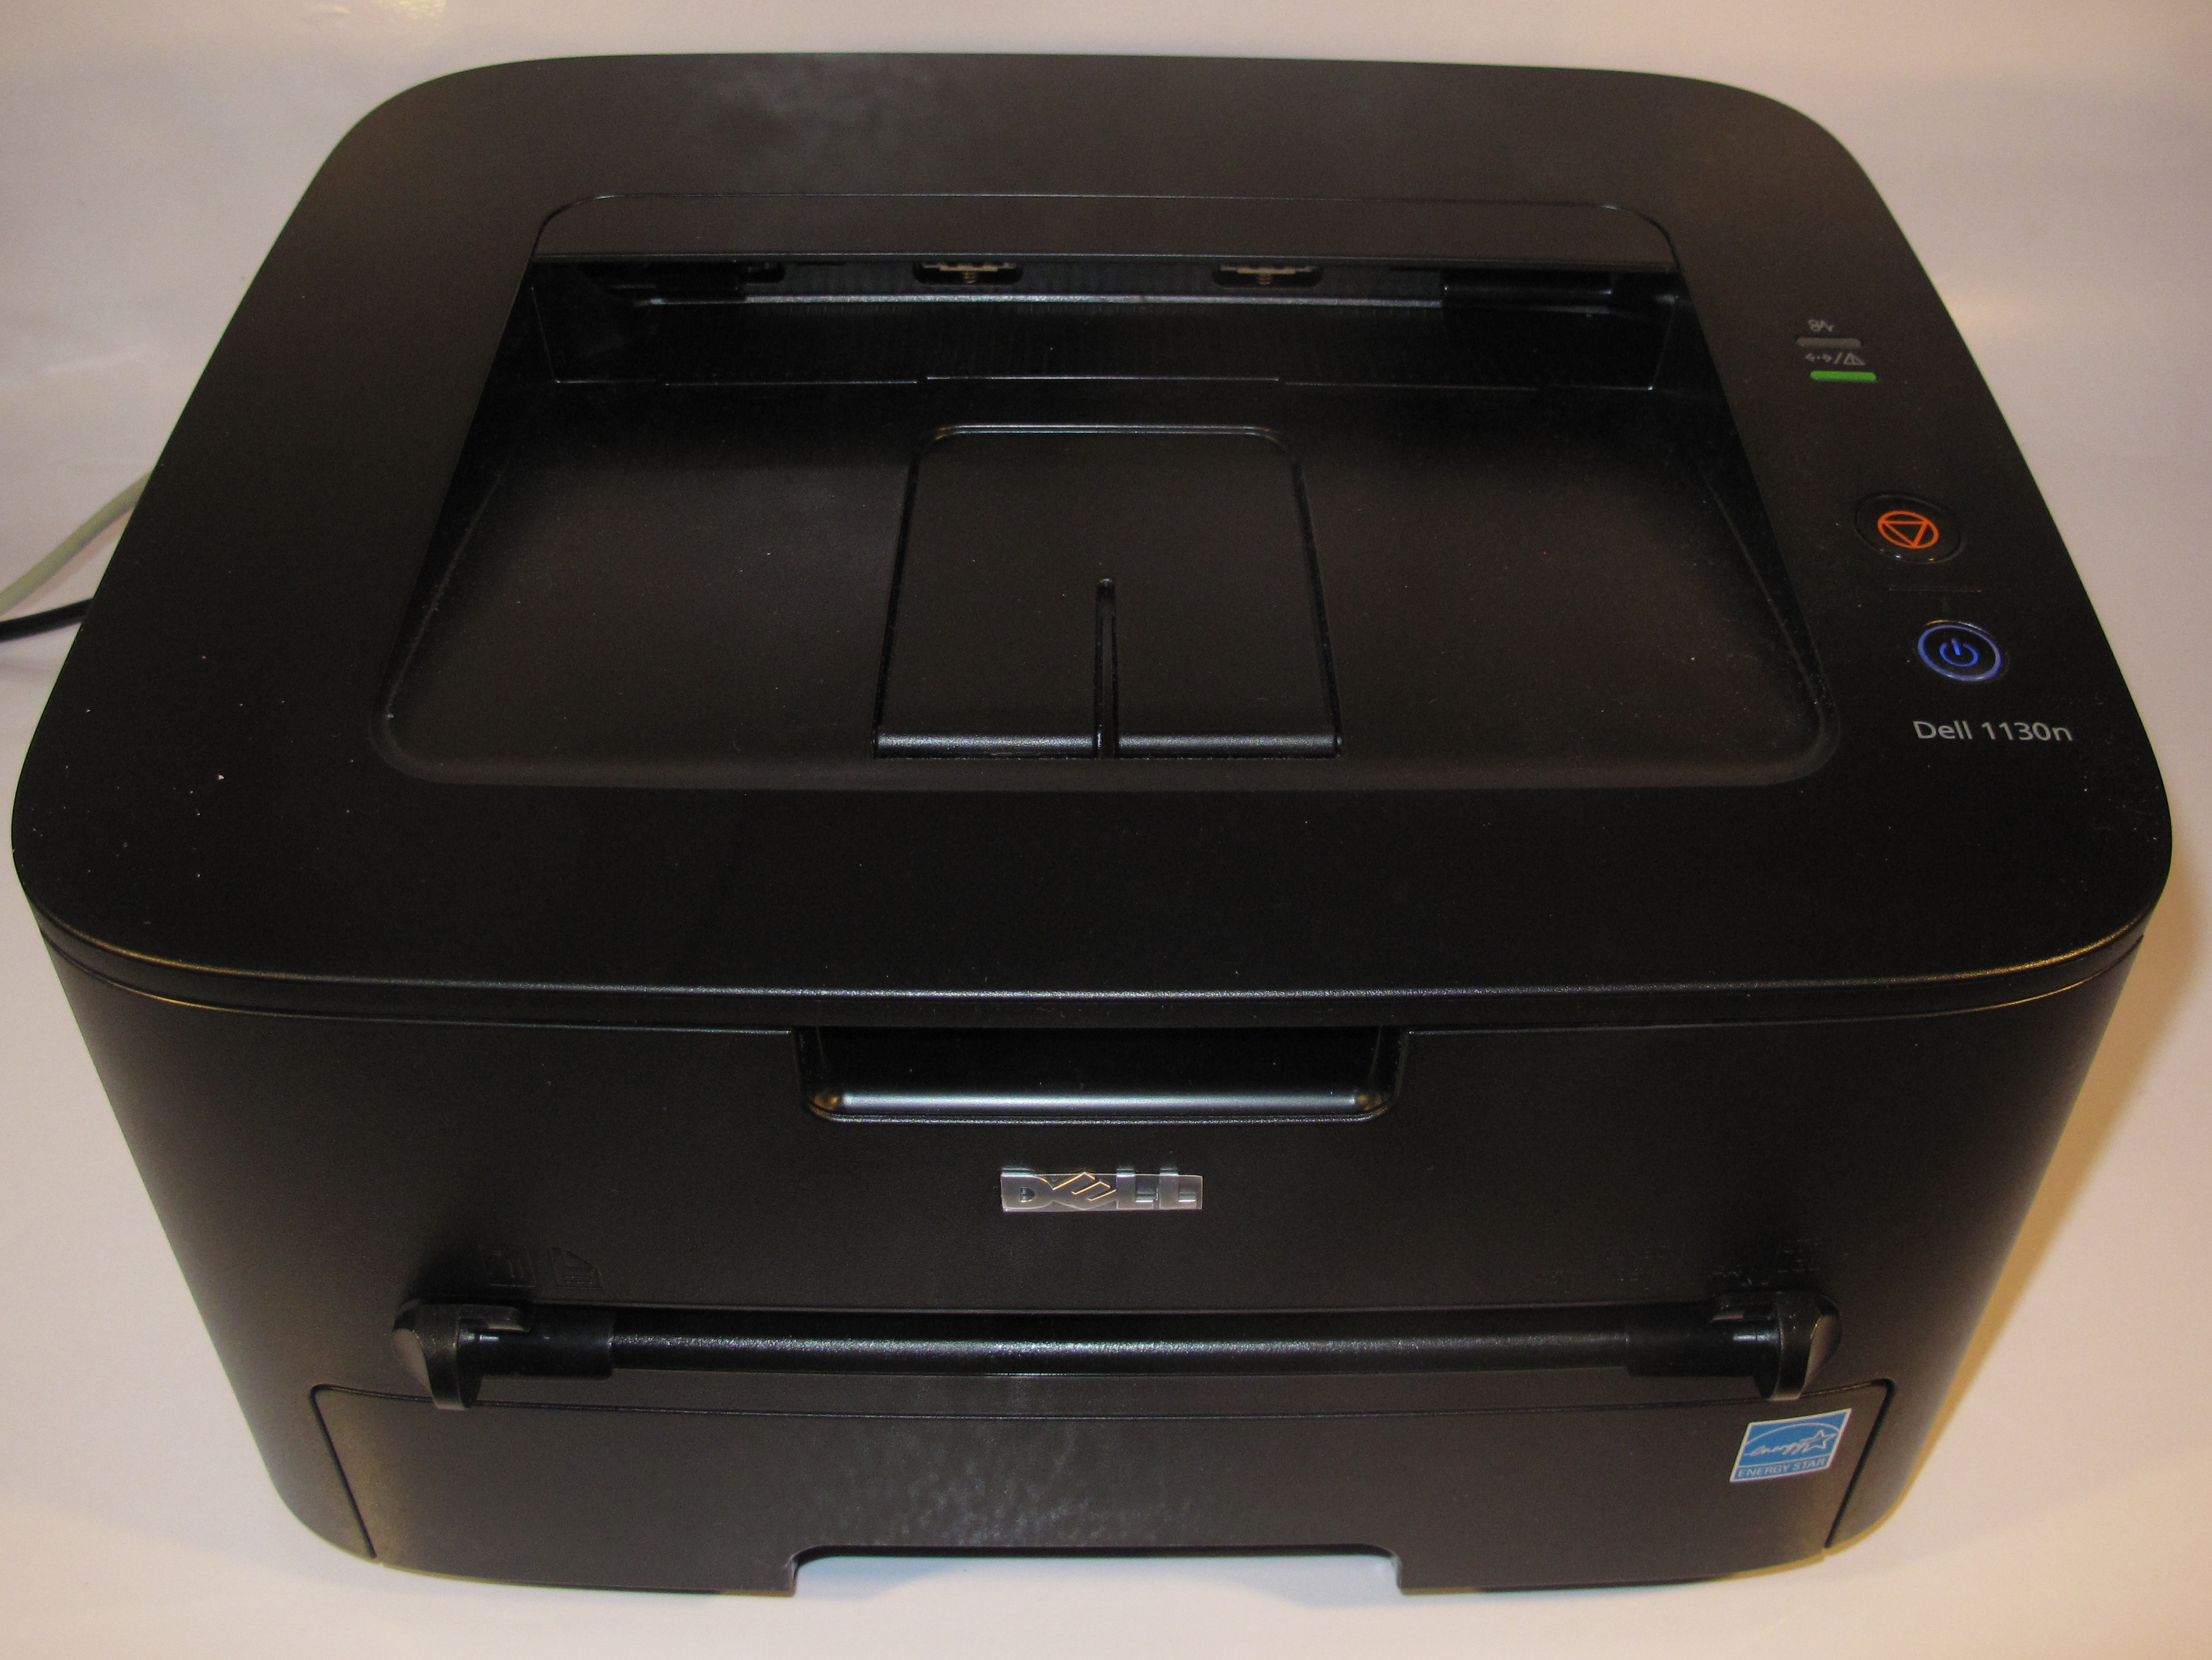 Product ReviewDell 1130n compact monochrome laser printer